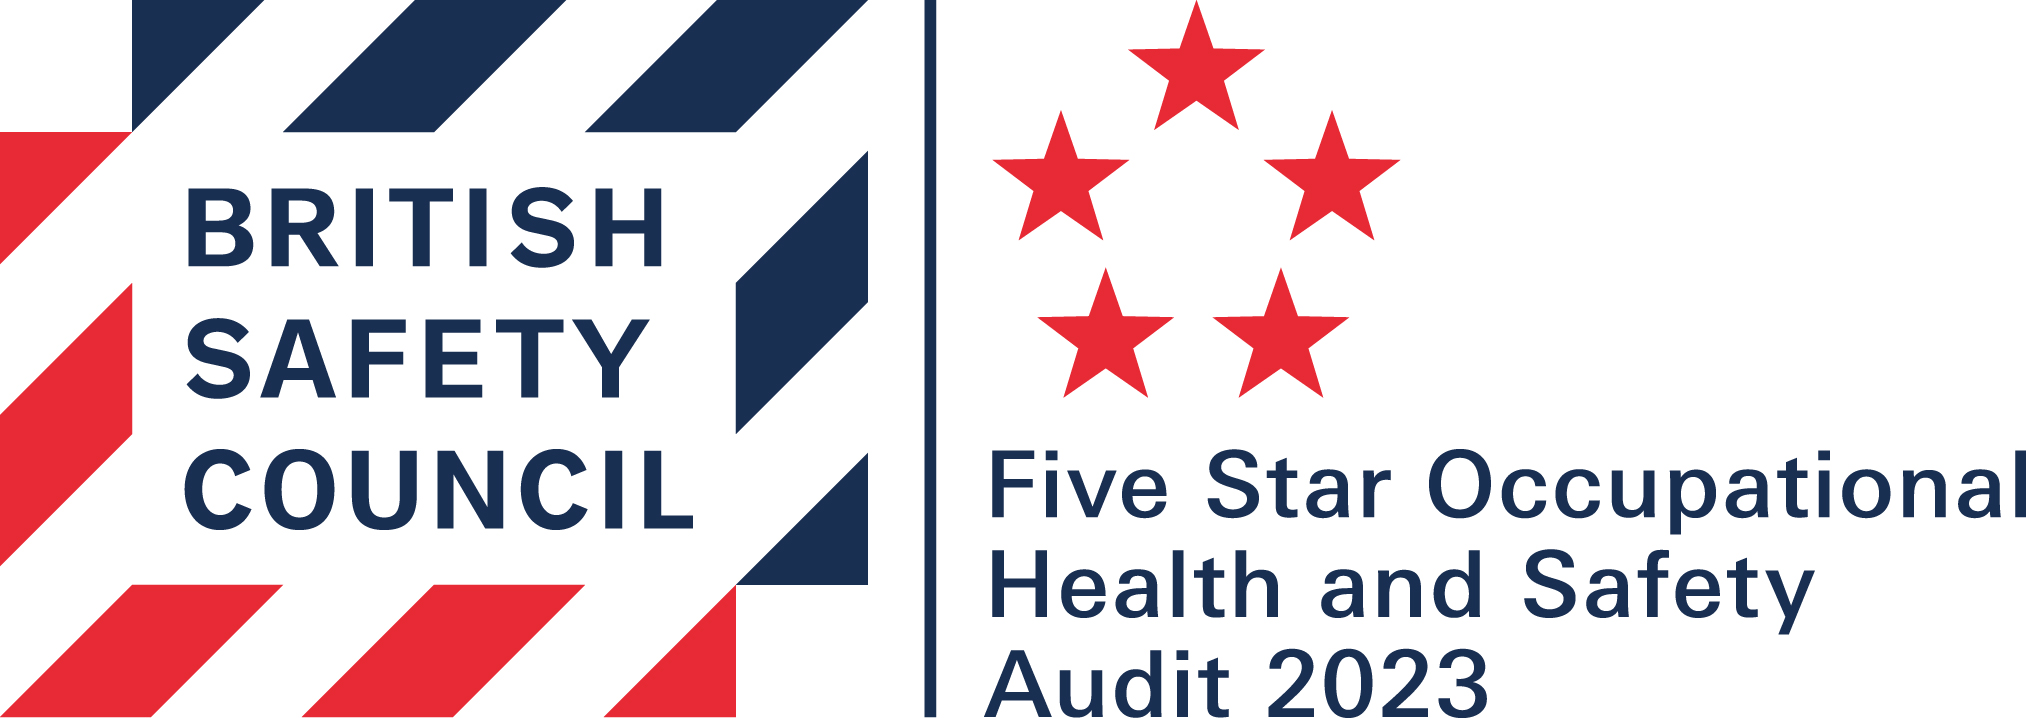 Five Star Occupational Health and Safety